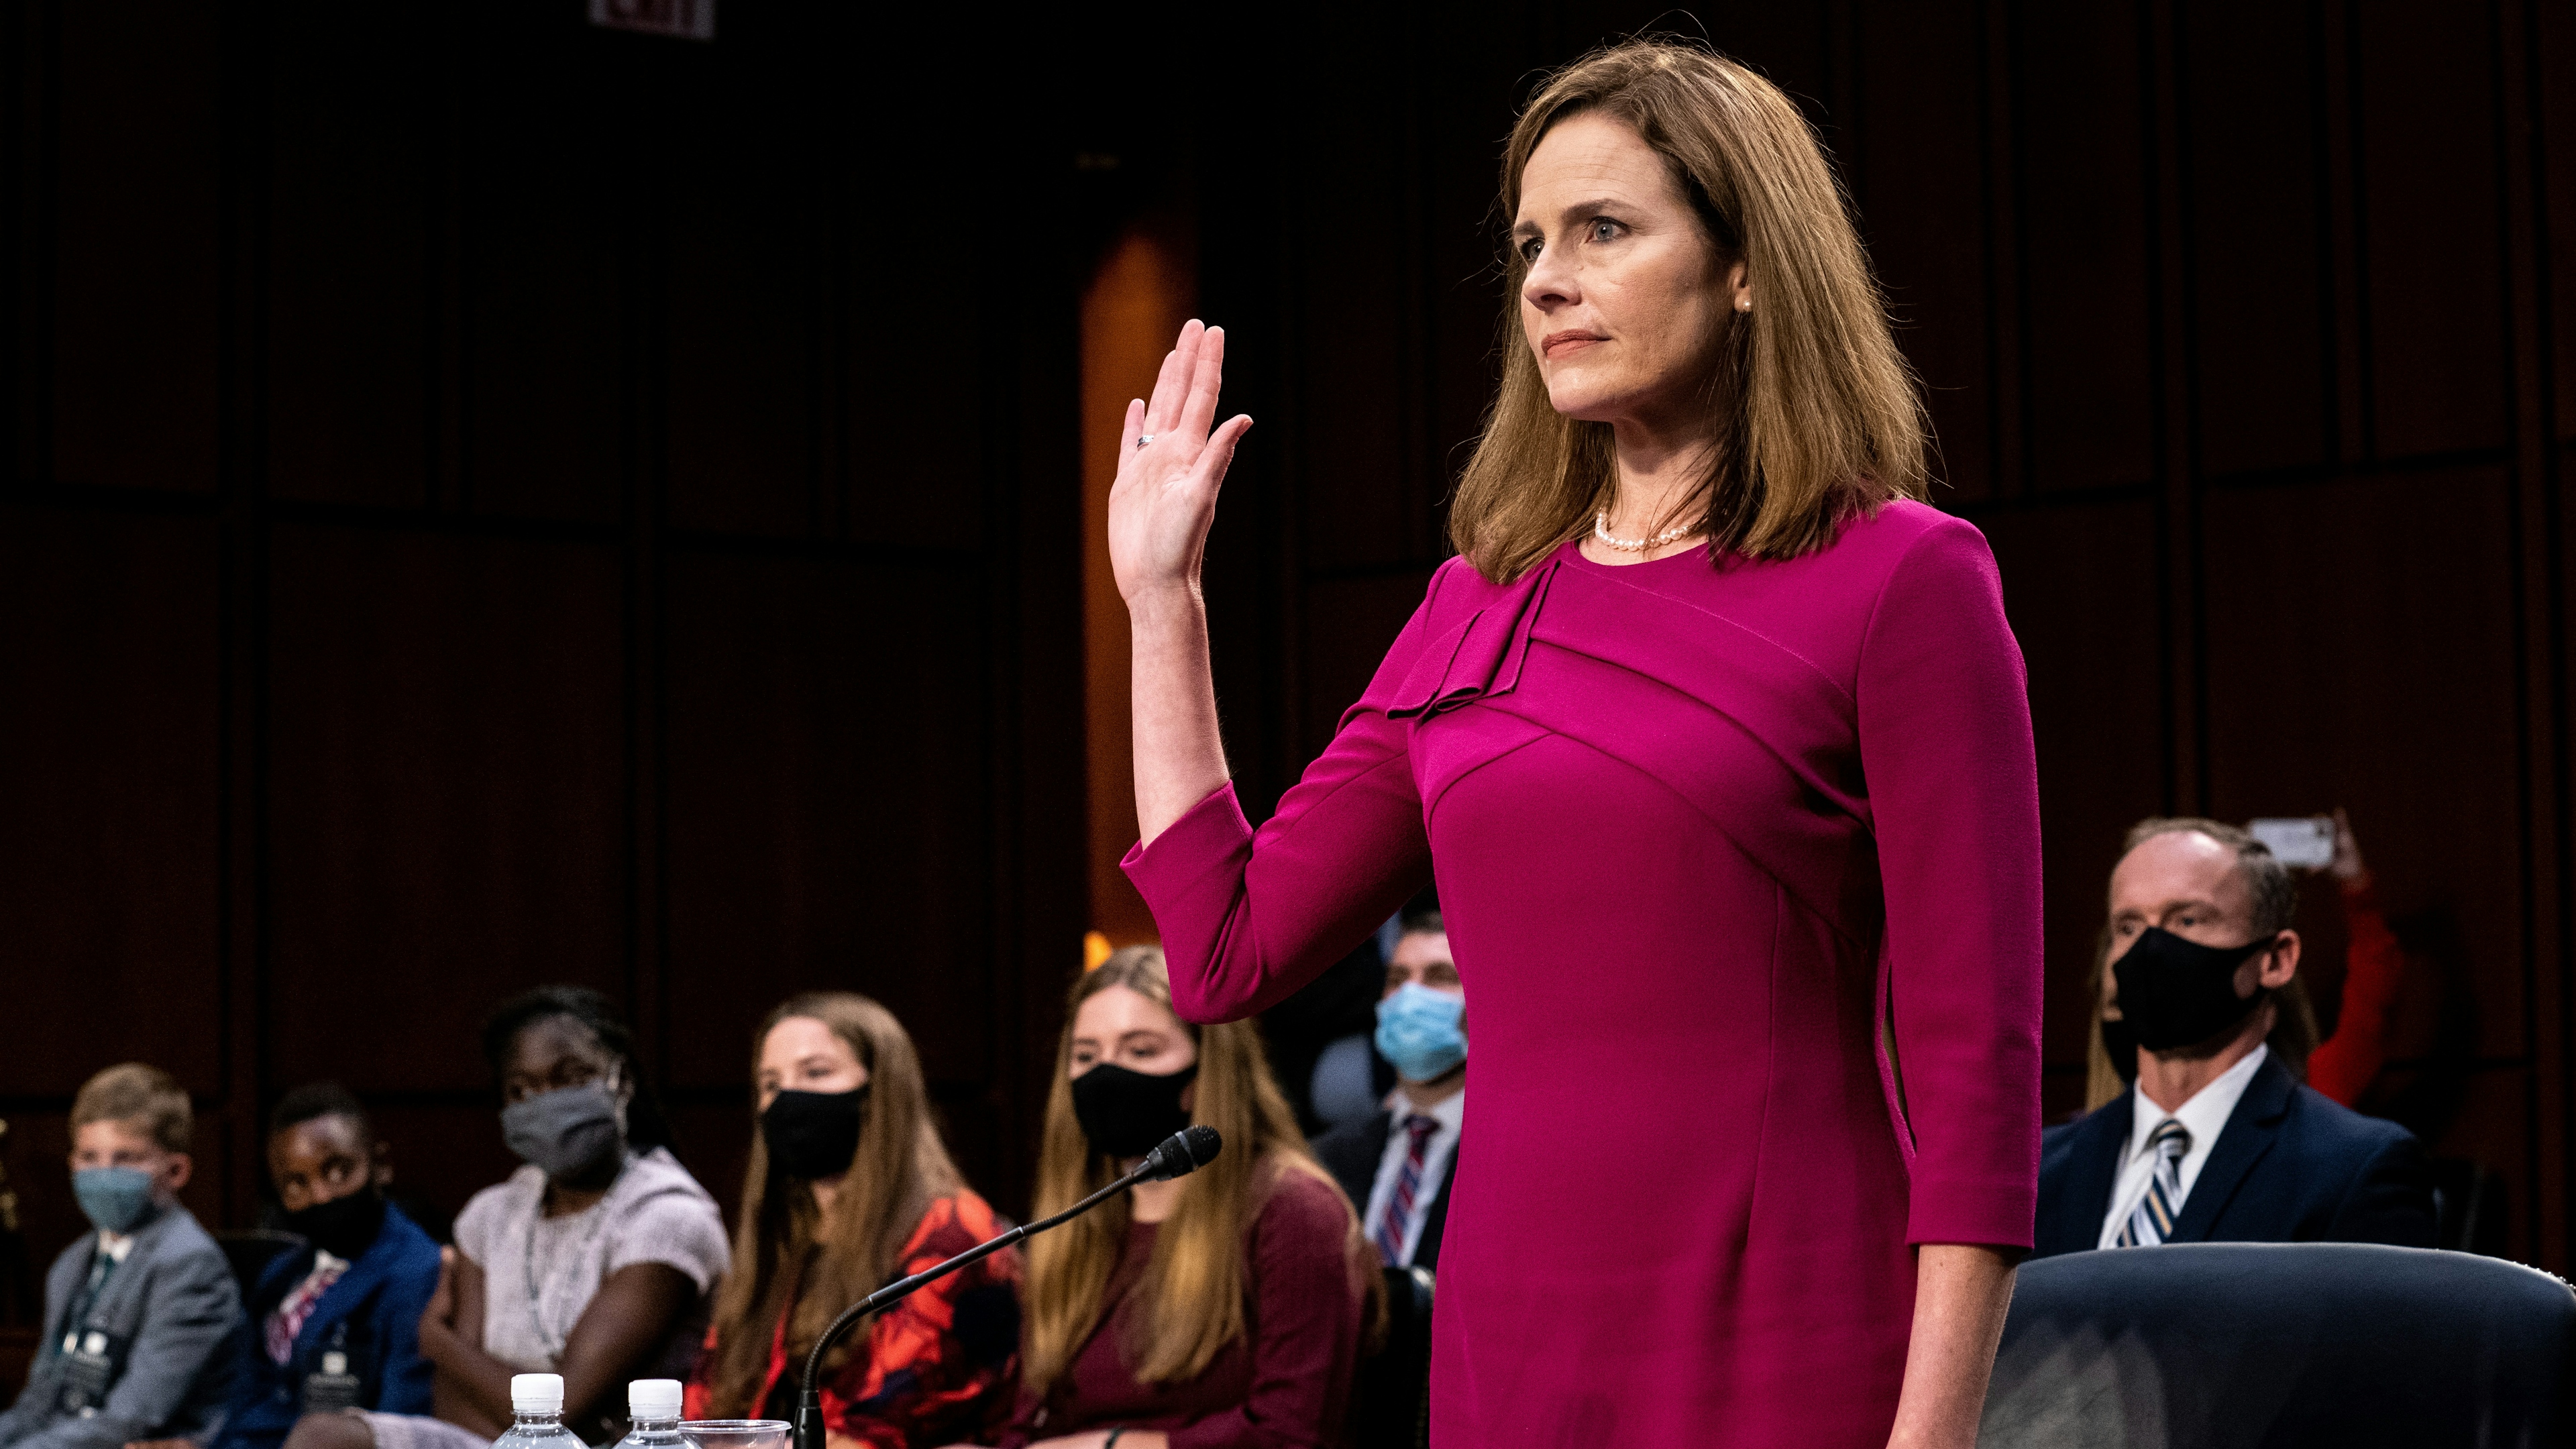 Supreme Court Justice nominee Judge Amy Coney Barrett is sworn in during the Senate Judiciary Committee confirmation hearing for Supreme Court Justice